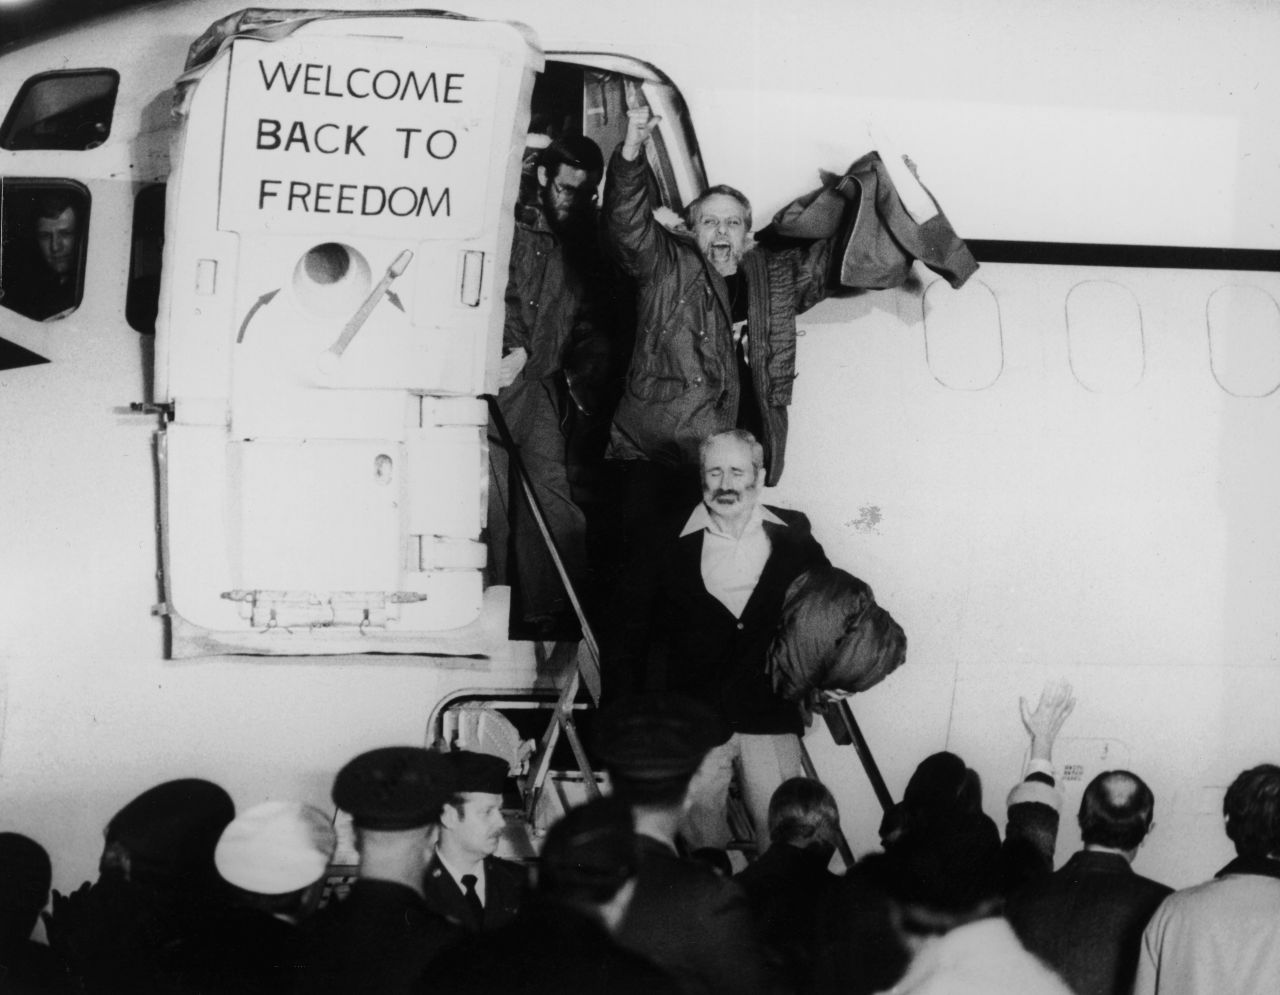 Minutes after Reagan's 1981 inauguration, the remaining U.S. hostages are released. They were flown to Wiesbaden Air Base in Germany, and the terms of their release included the unfreezing of Iranian assets. 